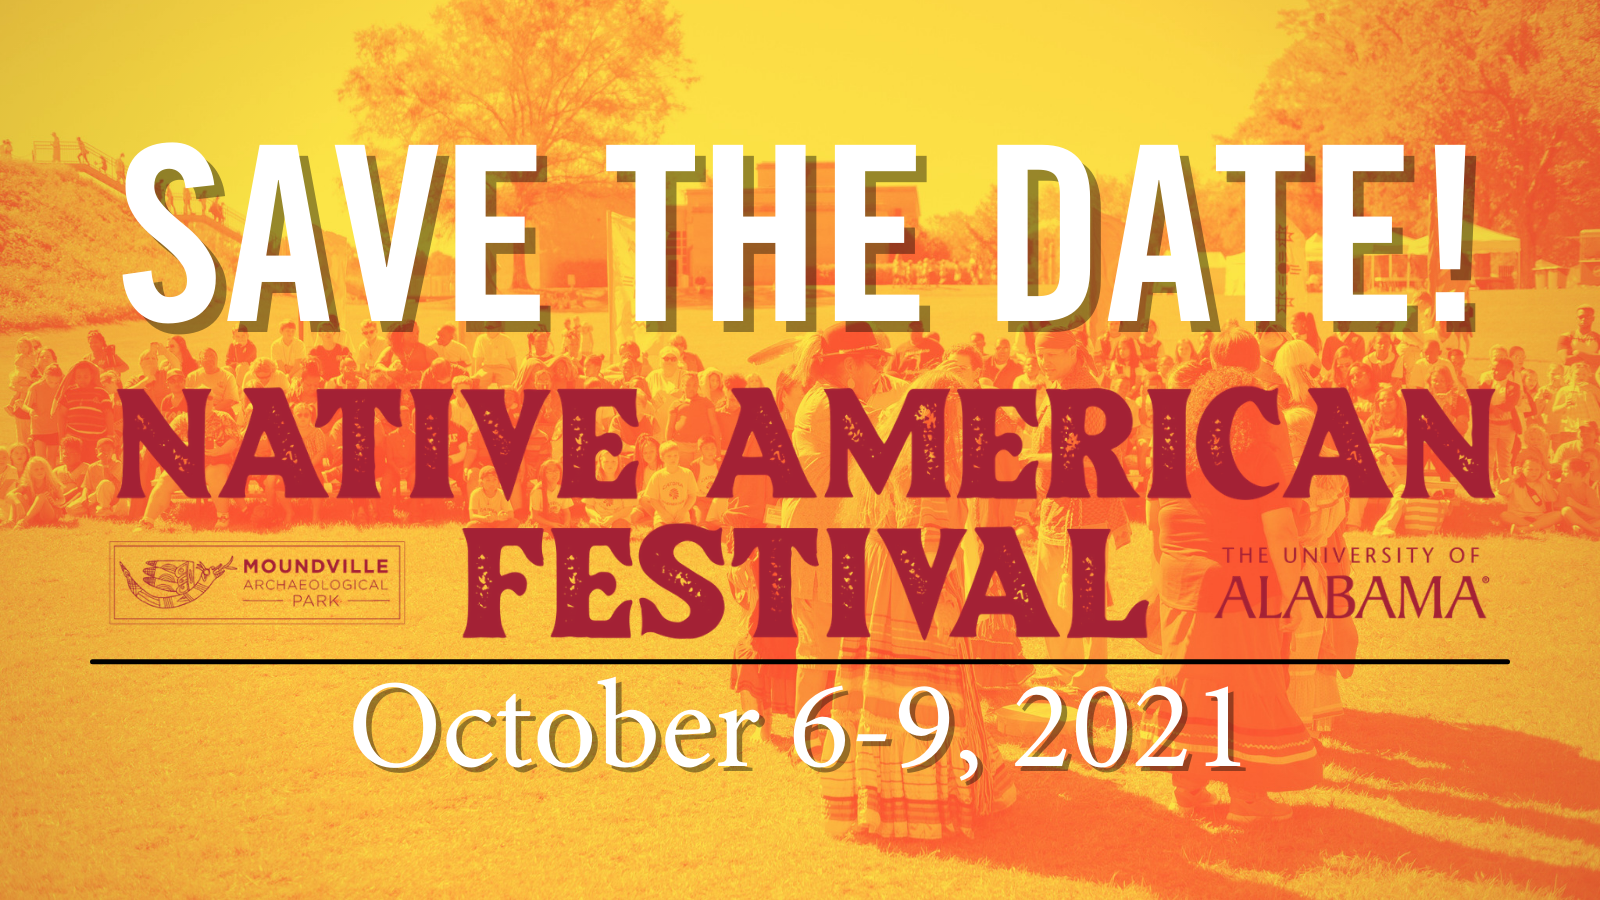 Save the Date Native American Festival October 6-9 2021